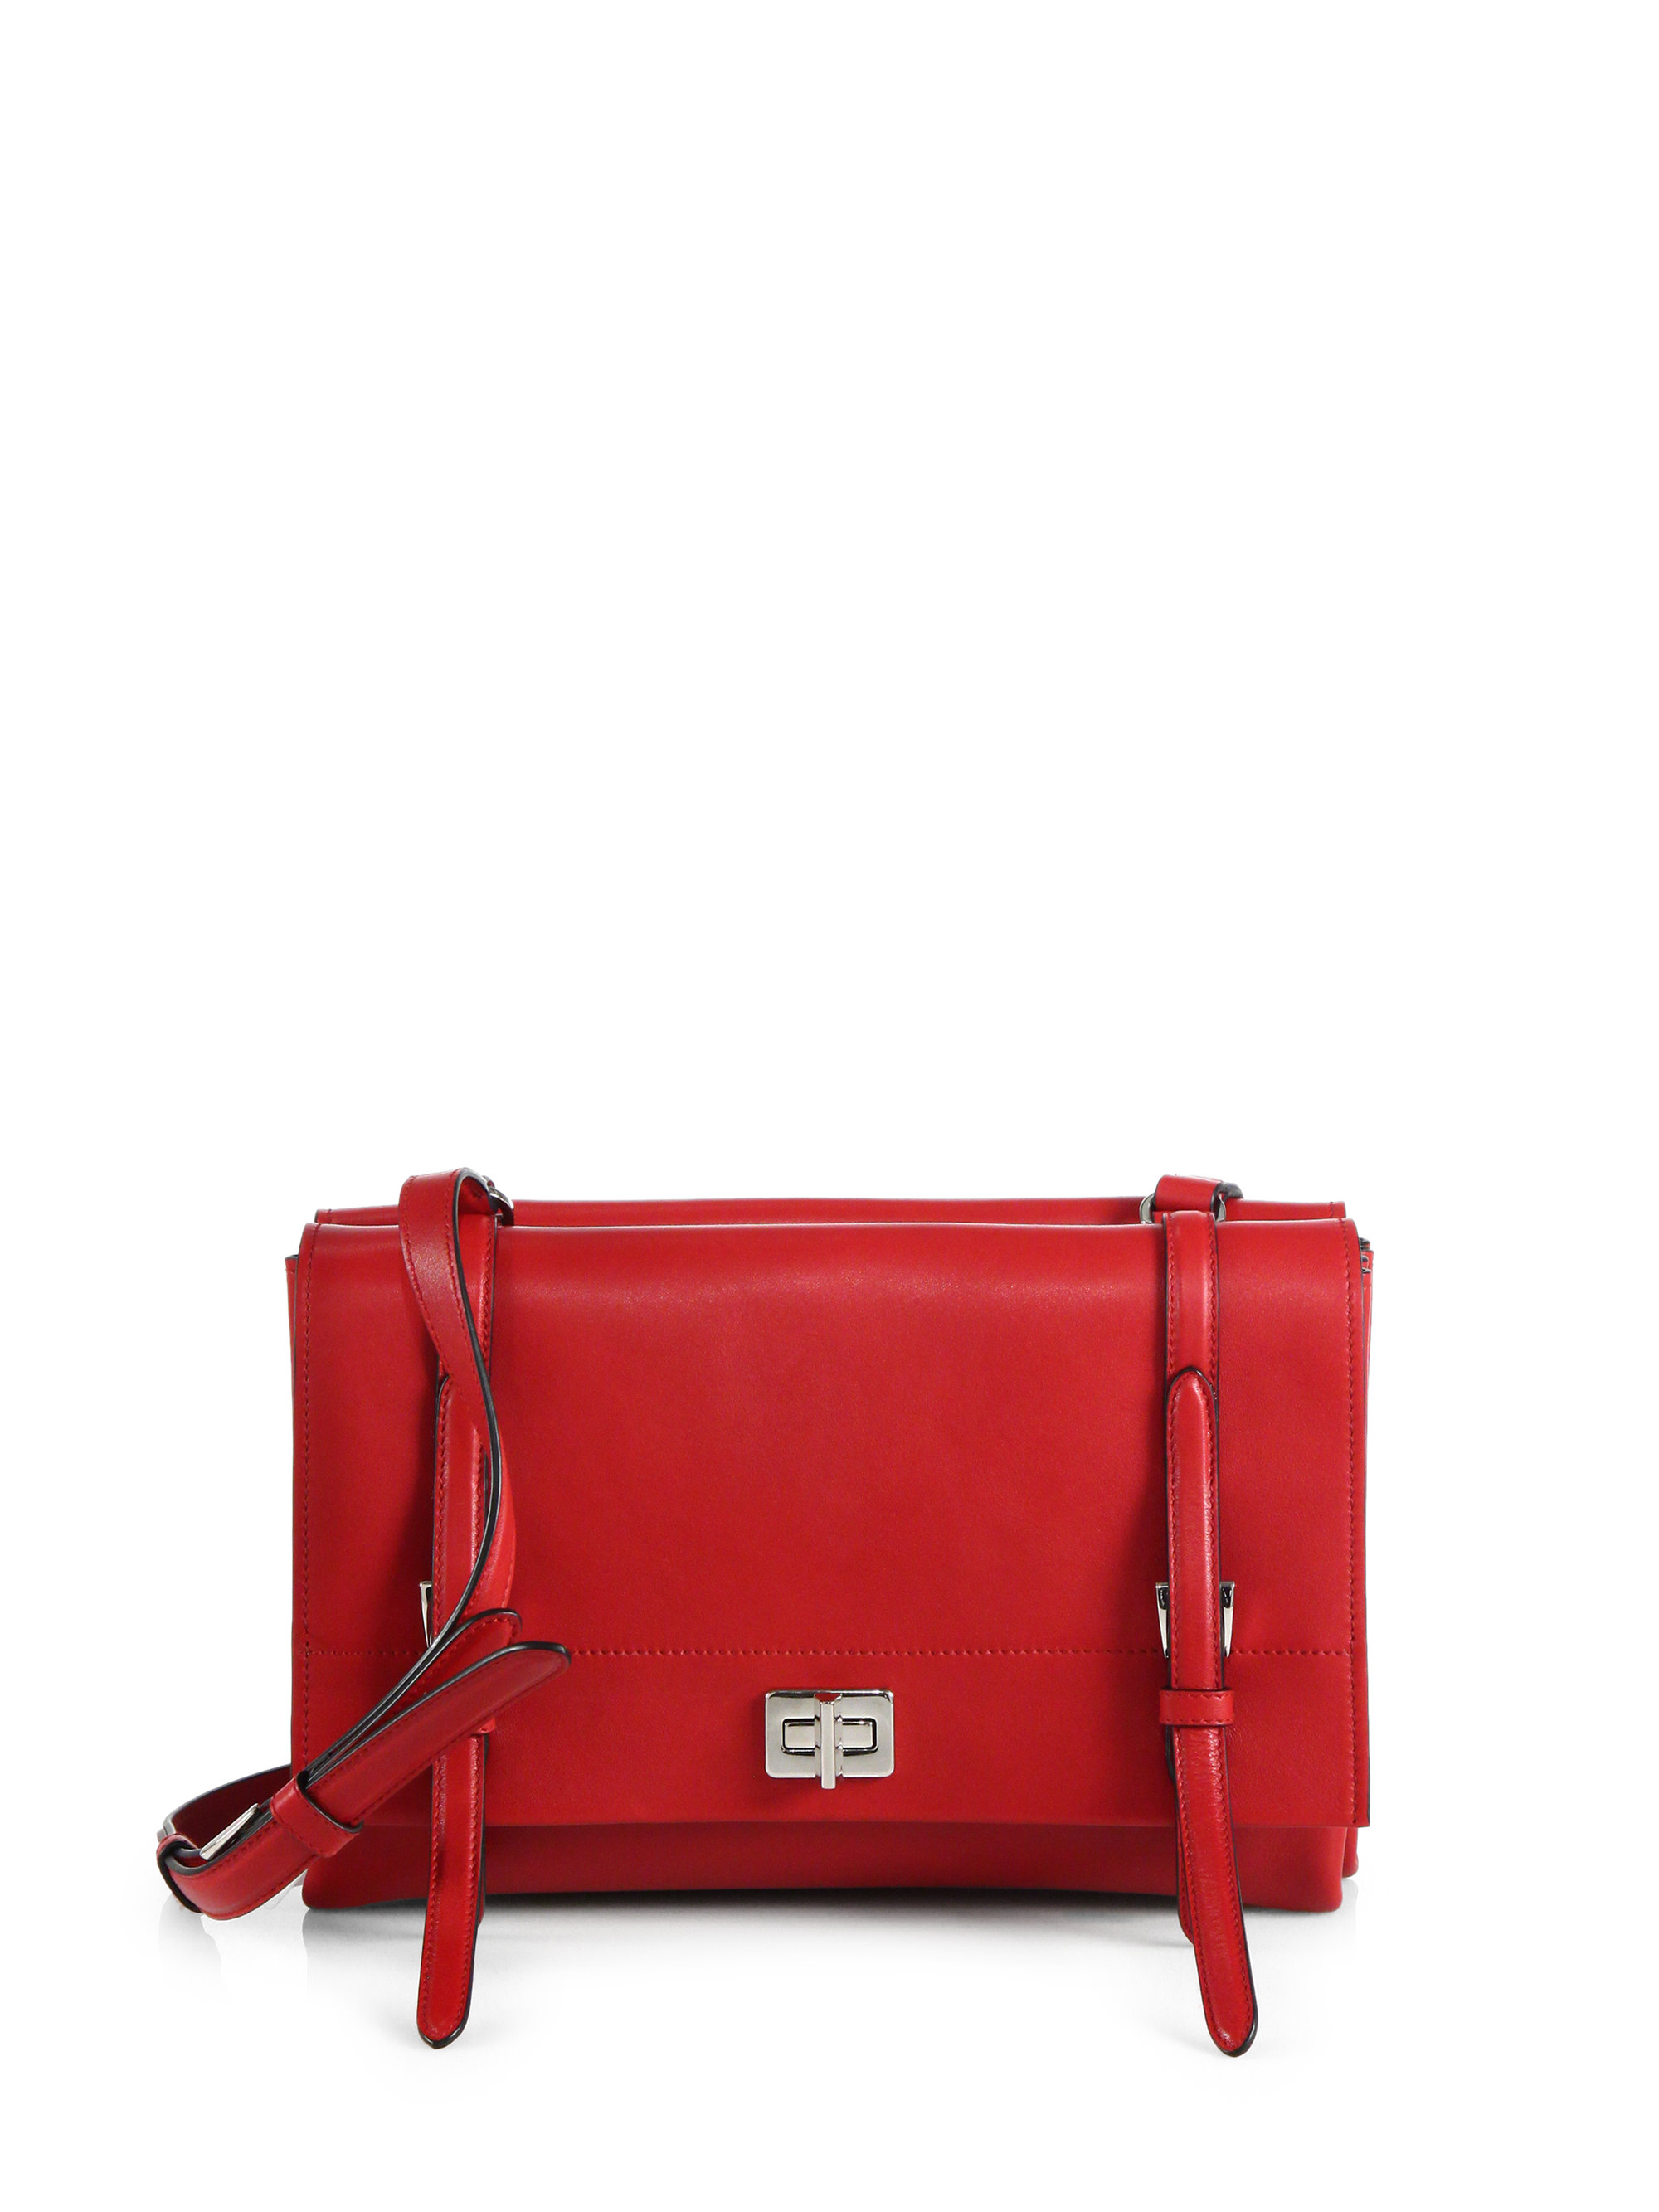 Prada Lux Calf Double Shoulder Bag in Red (FUOCO-RED)